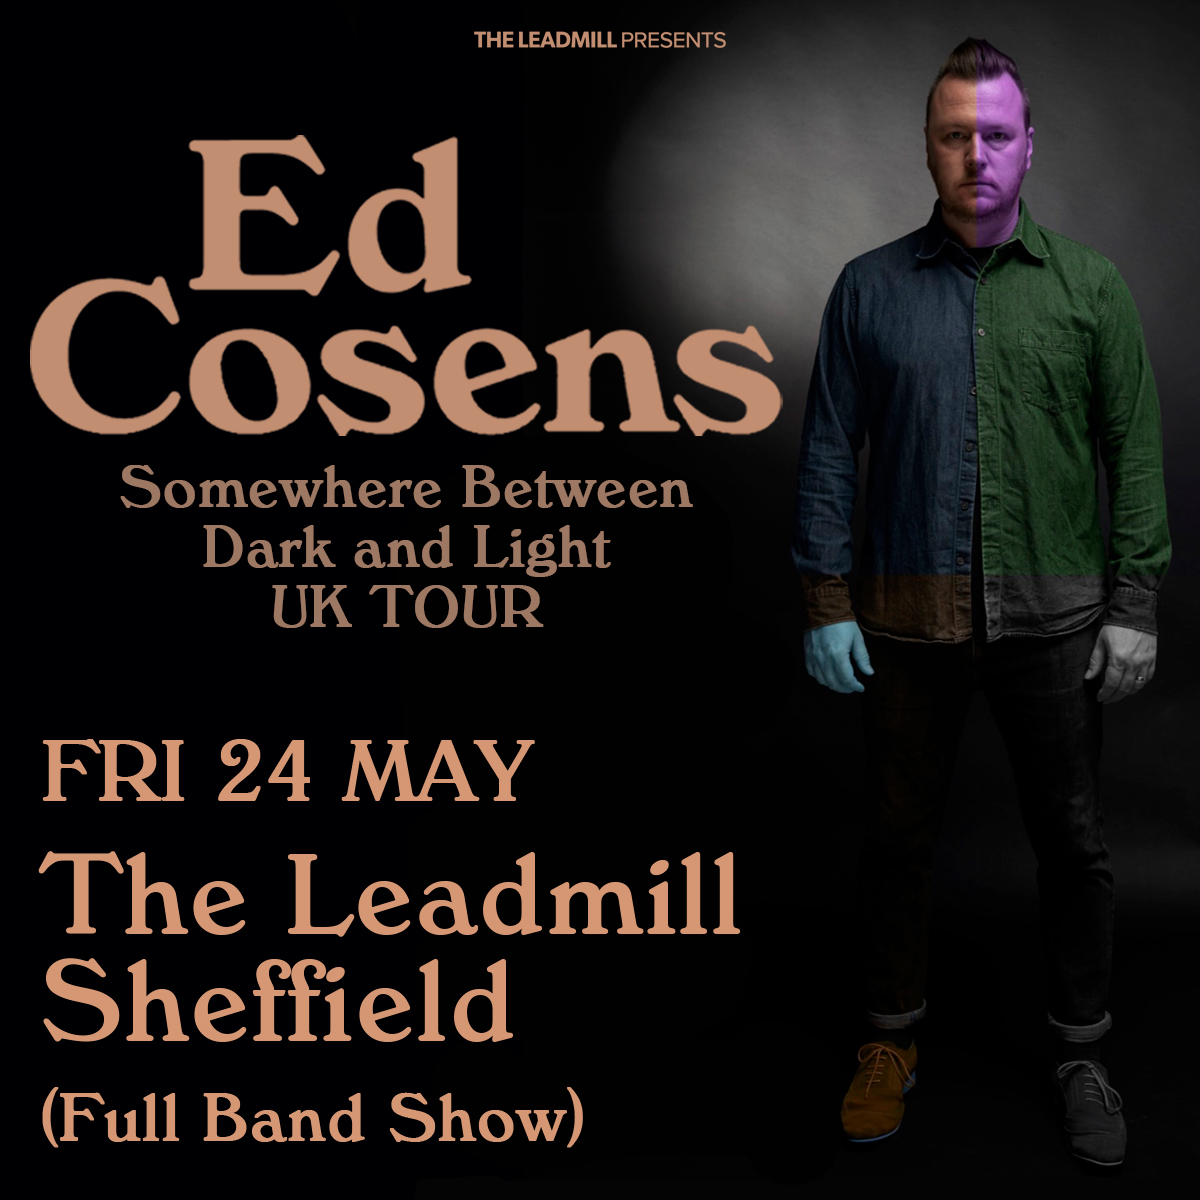 As soon as his Lantern Theatre show sold out in the space of a morning, we knew @edcosens would smash it out of the park with his own Leadmill headline show ❤️ This'll be a proper treat, not long now, still some tickets here > leadmill.co.uk/event/ed-cosen…